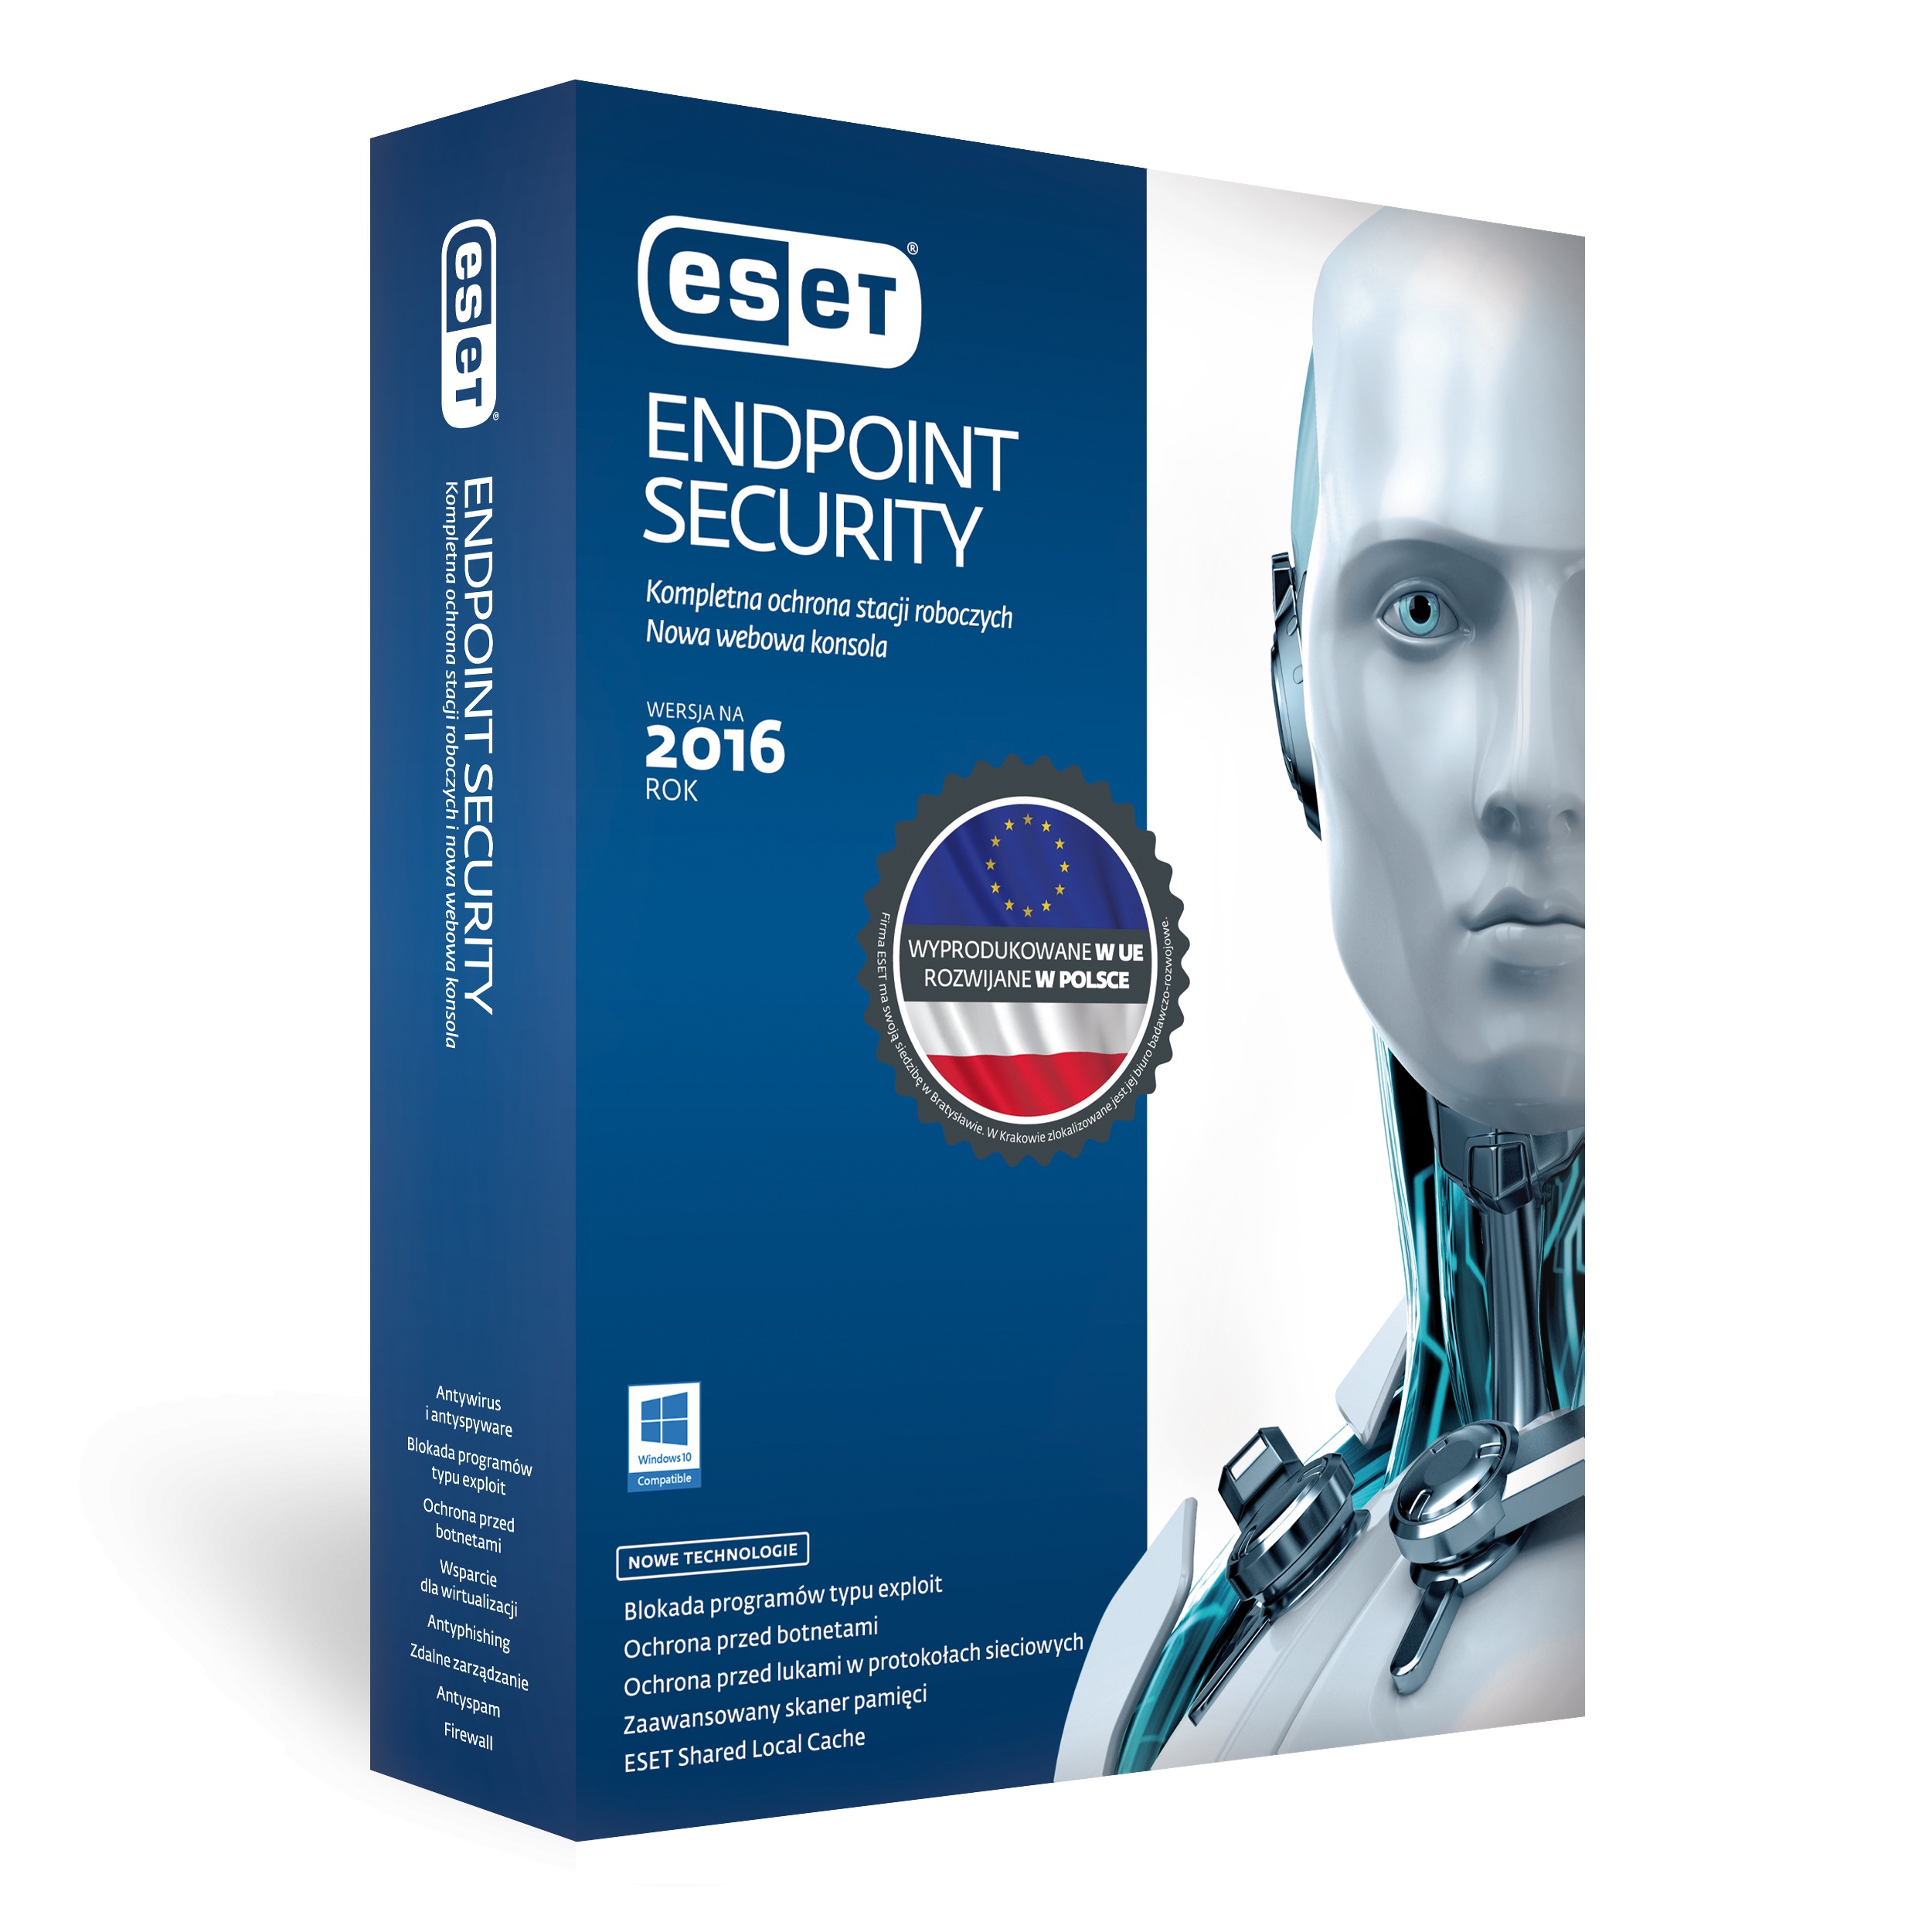 ESET Endpoint Security 10.1.2058.0 instal the new version for apple